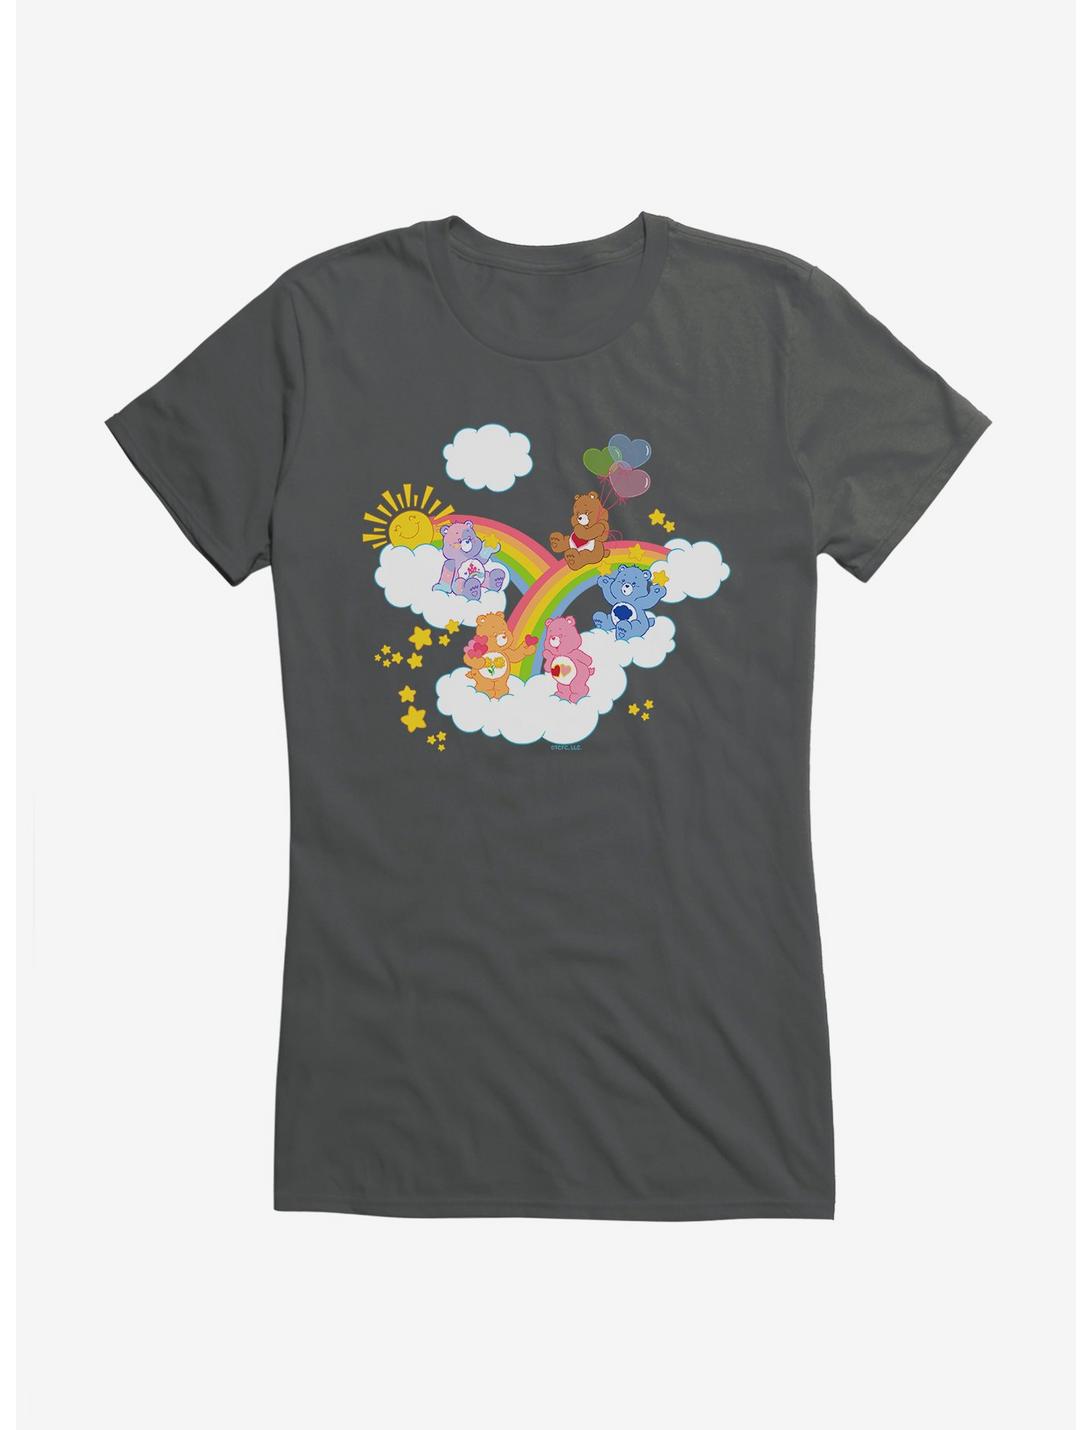 Care Bears Over The Rainbow Girls T-Shirt, CHARCOAL, hi-res